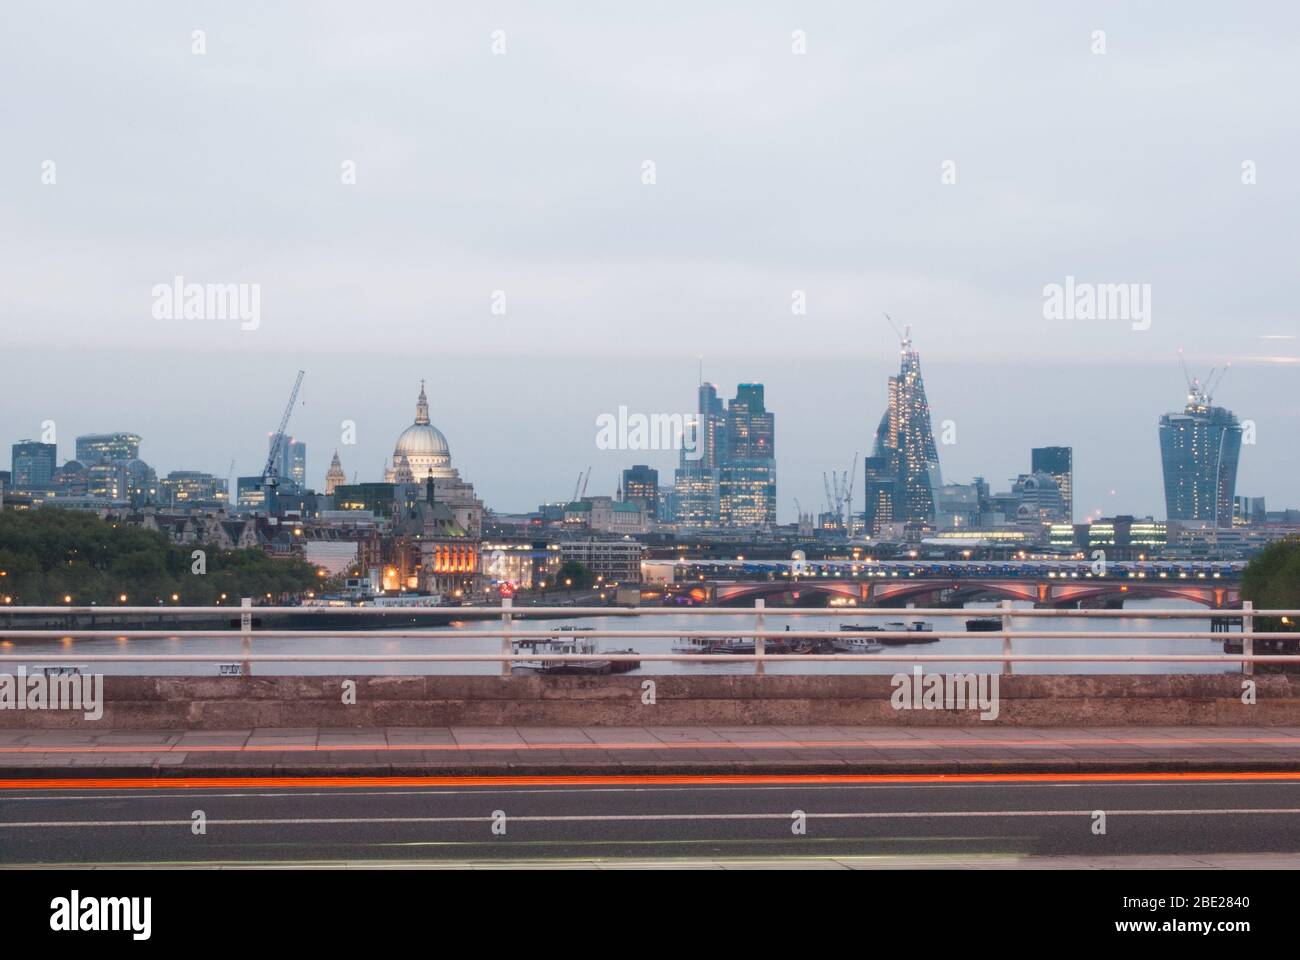 Walkie Talkie Building Gherkin St. Pauls Cathedral Cheesegrater City of London Skyline at Night Dark Twilight Blue Hour Stock Photo